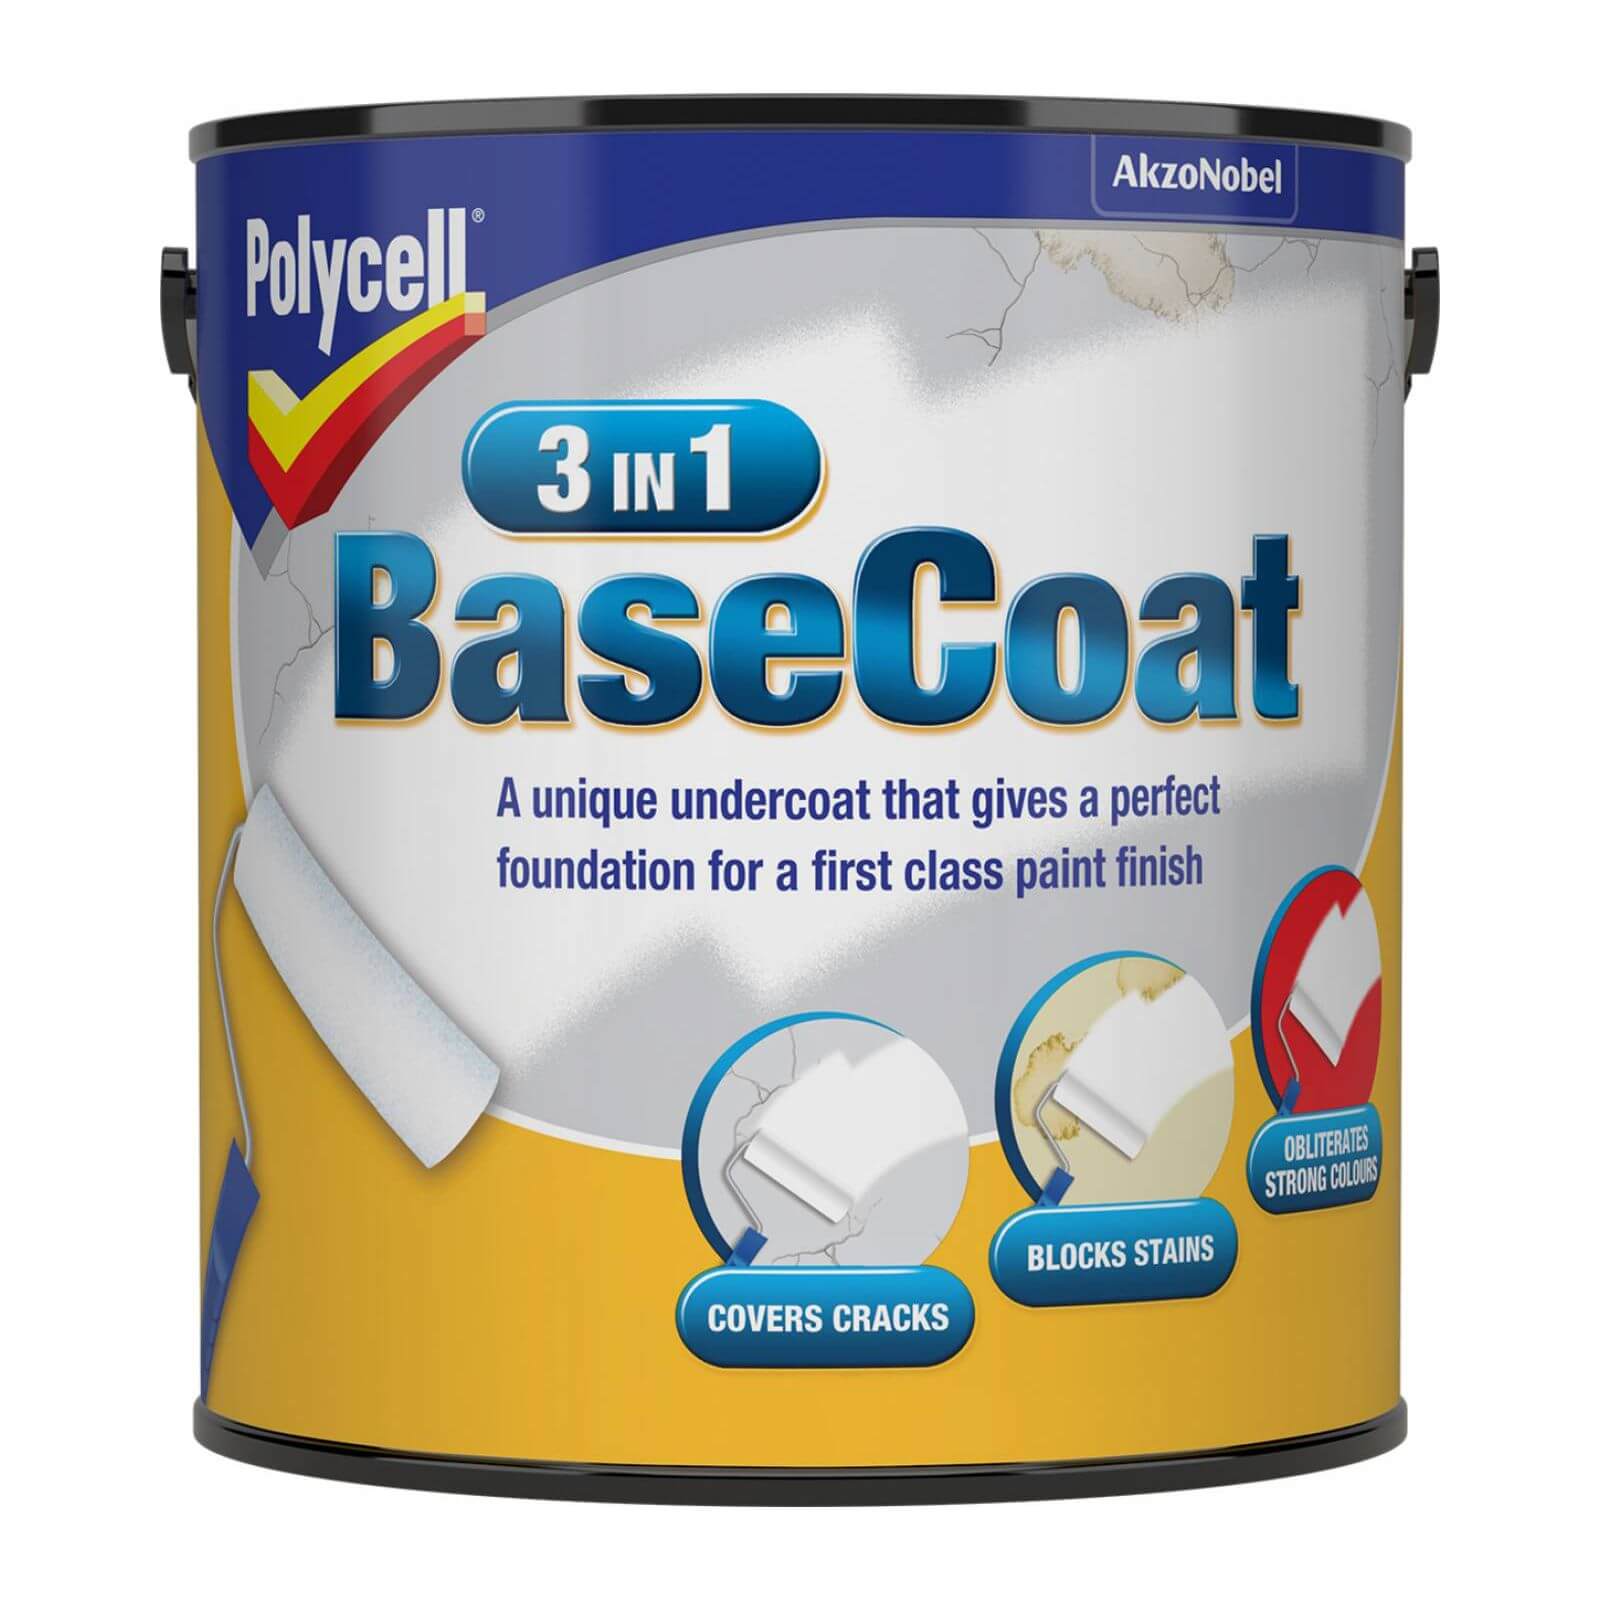 Photo of Polycell 3 In 1 Basecoat - 2.5l